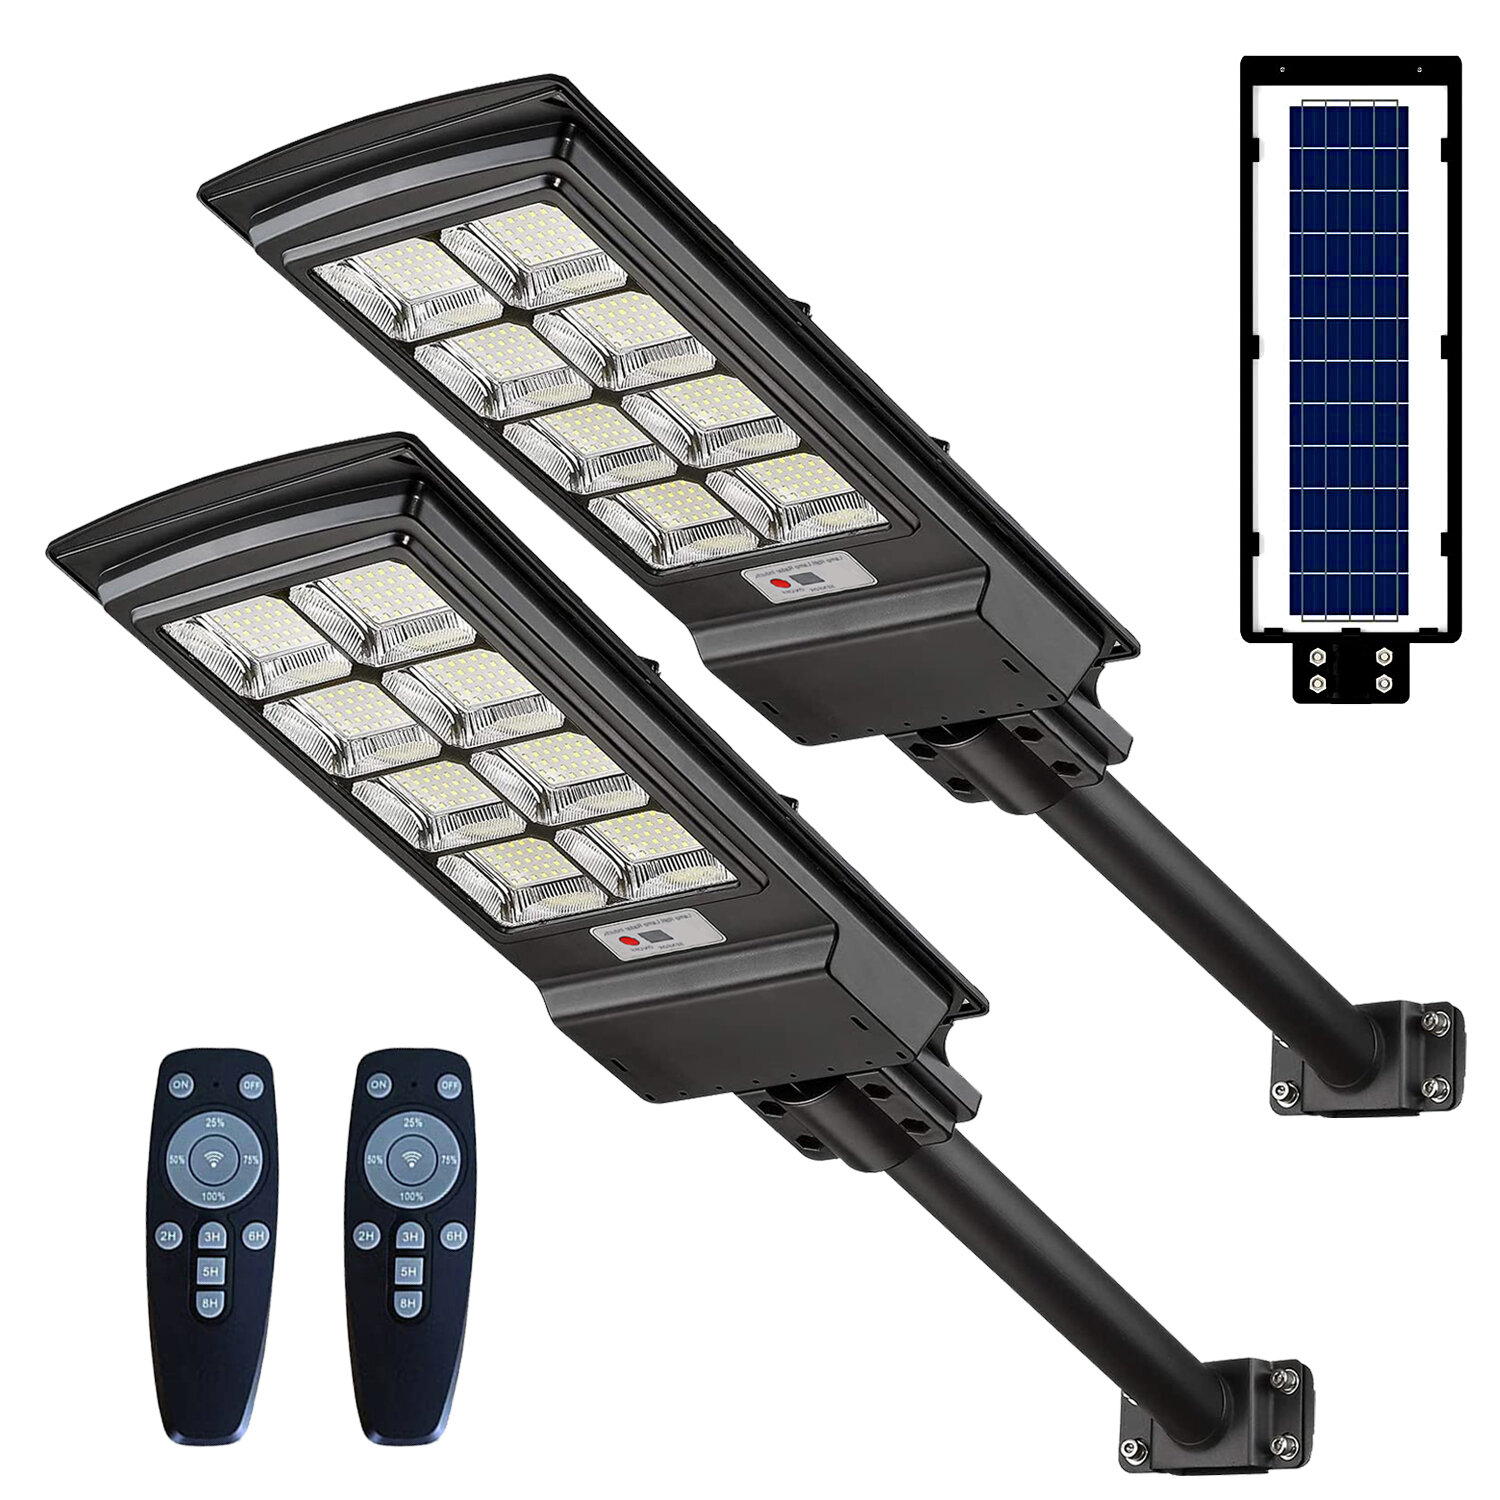 DENGMALL 400W LED Solar Street Lights Outdoor, Dusk to Dawn Security Flood Light with Remote Control ＆ Pole, Wireless, Waterproof, Perfect for Yard, - 1